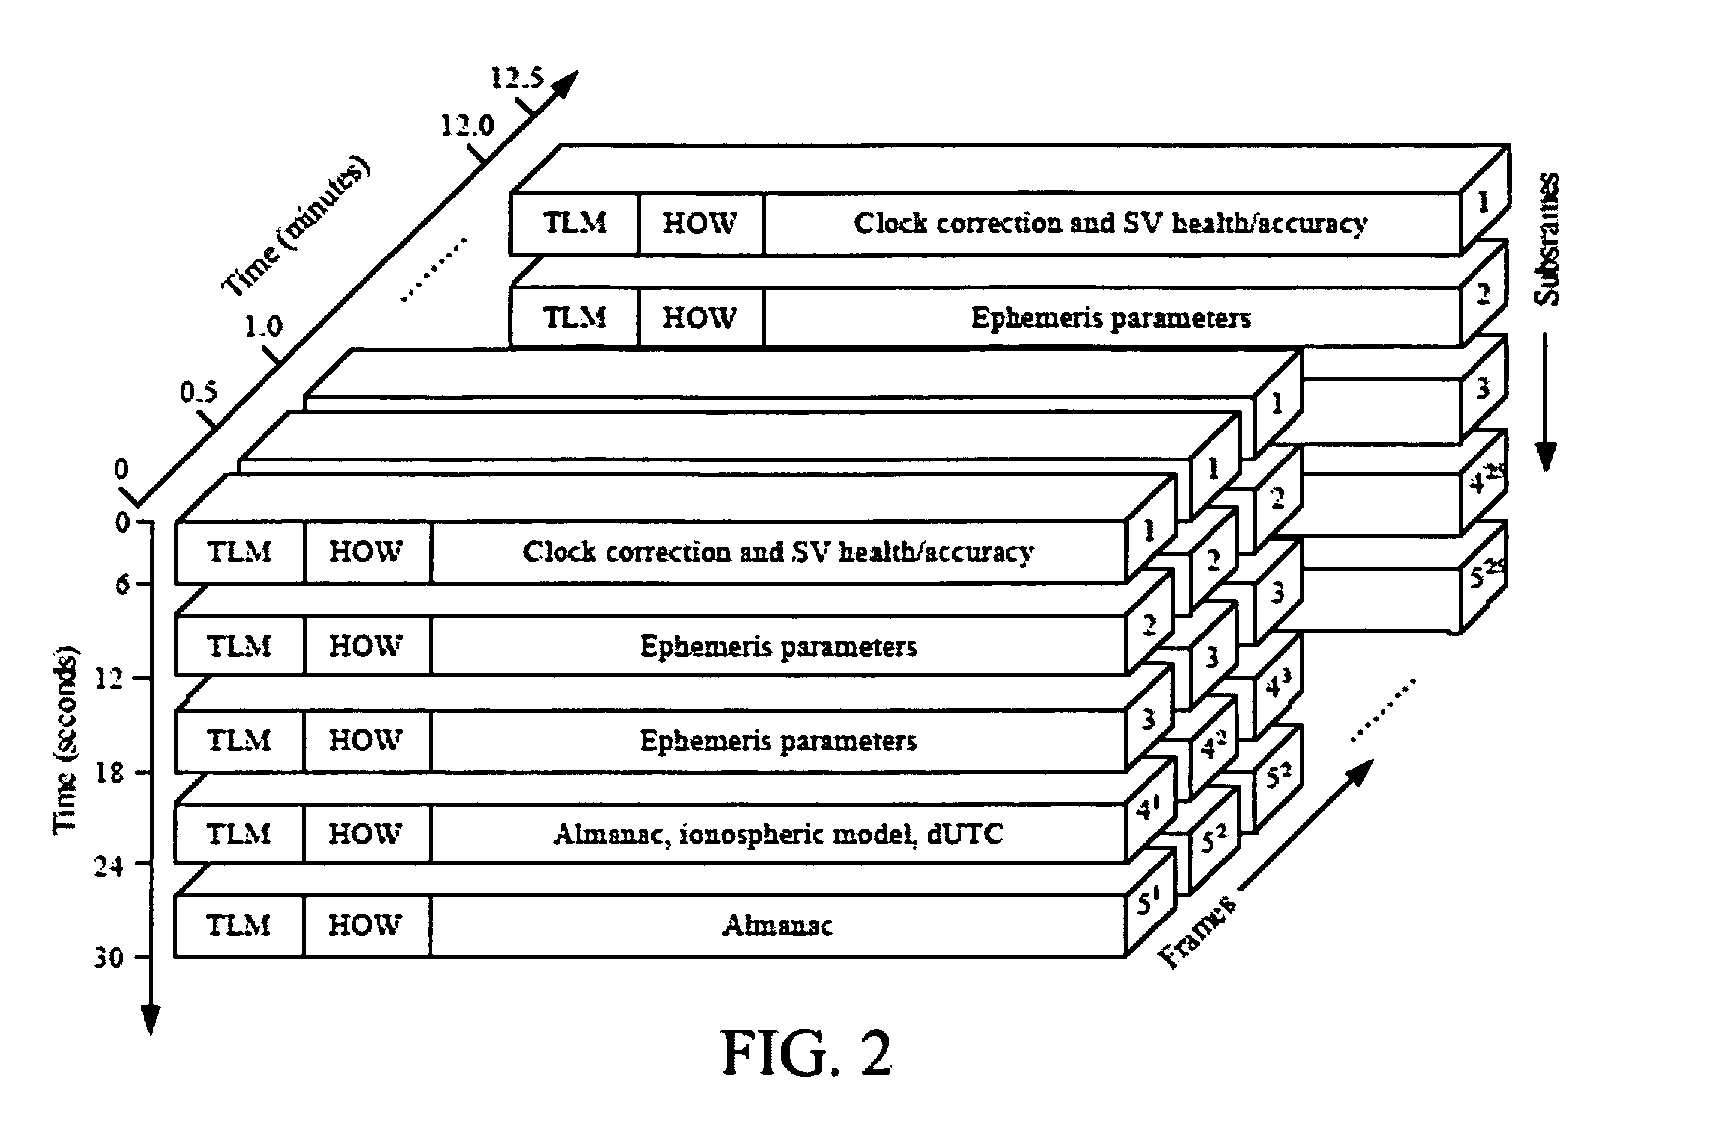 Method and apparatus for collecting subframes of satellite navigation data